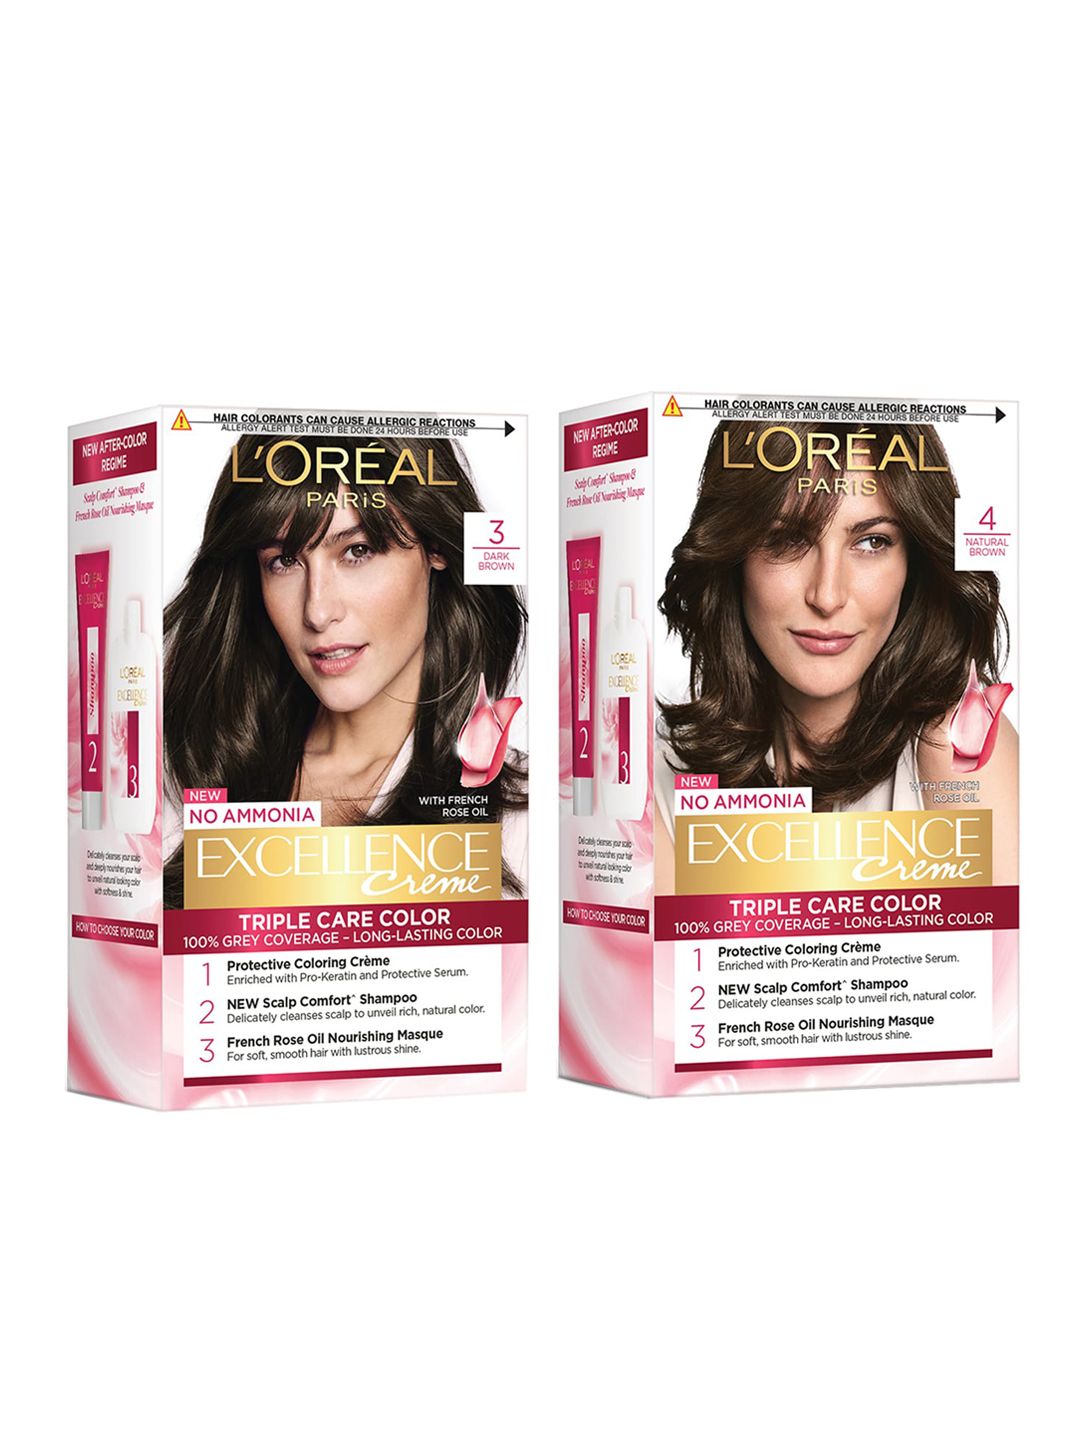 Loreal Paris Set of Excellence Creme Color Dark Brown 03 & Natural Brown 04 Hair Colour Price in India